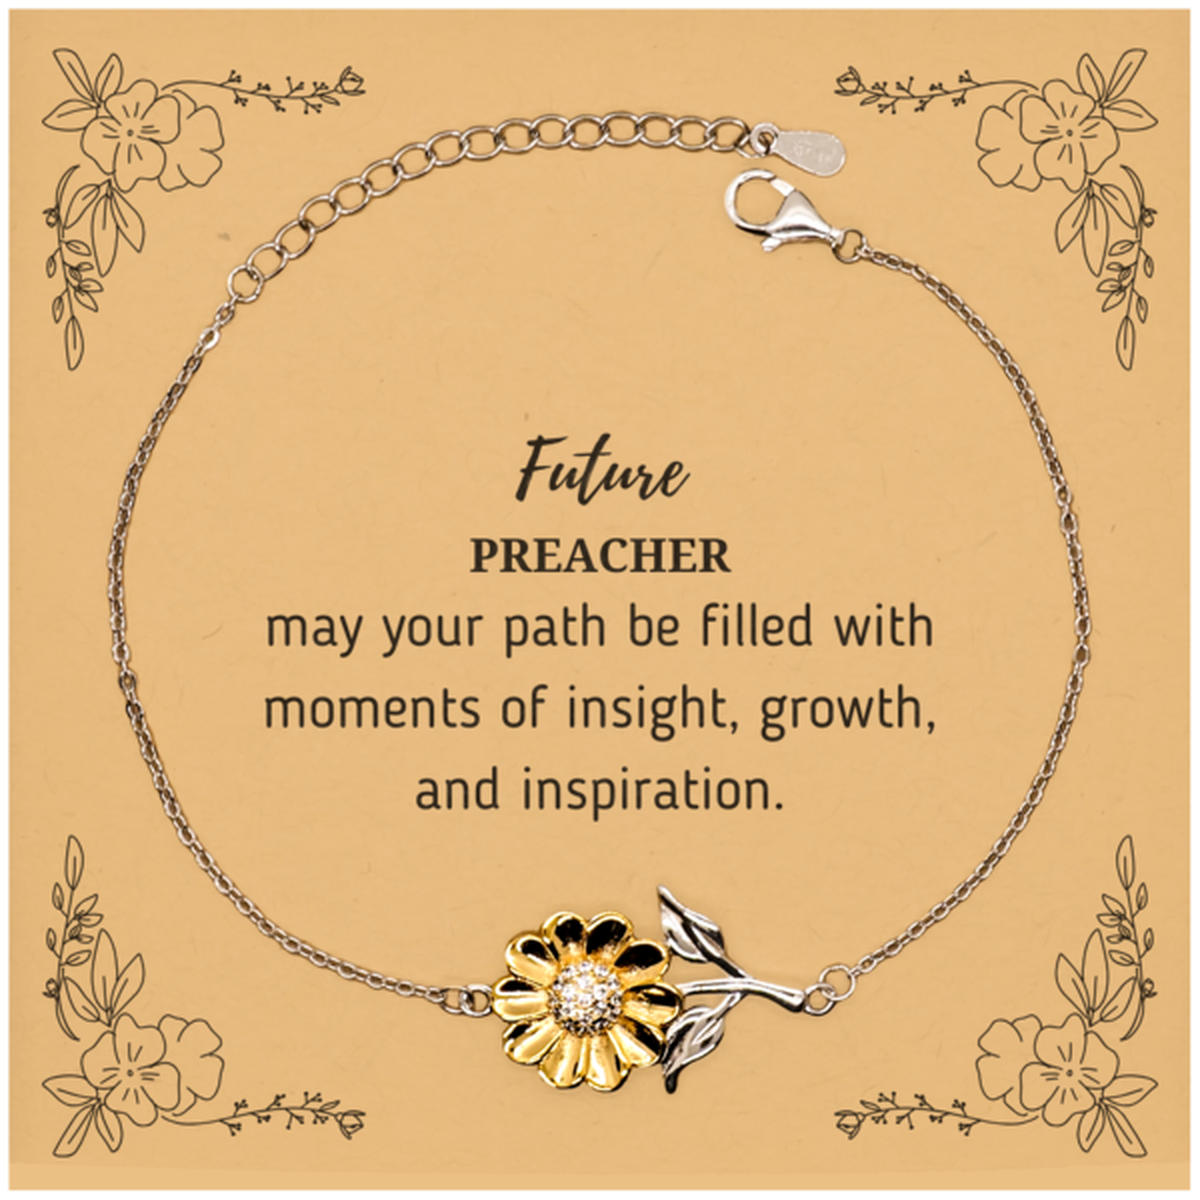 Future Preacher Gifts, May your path be filled with moments of insight, Graduation Gifts for New Preacher, Christmas Unique Sunflower Bracelet For Men, Women, Friends